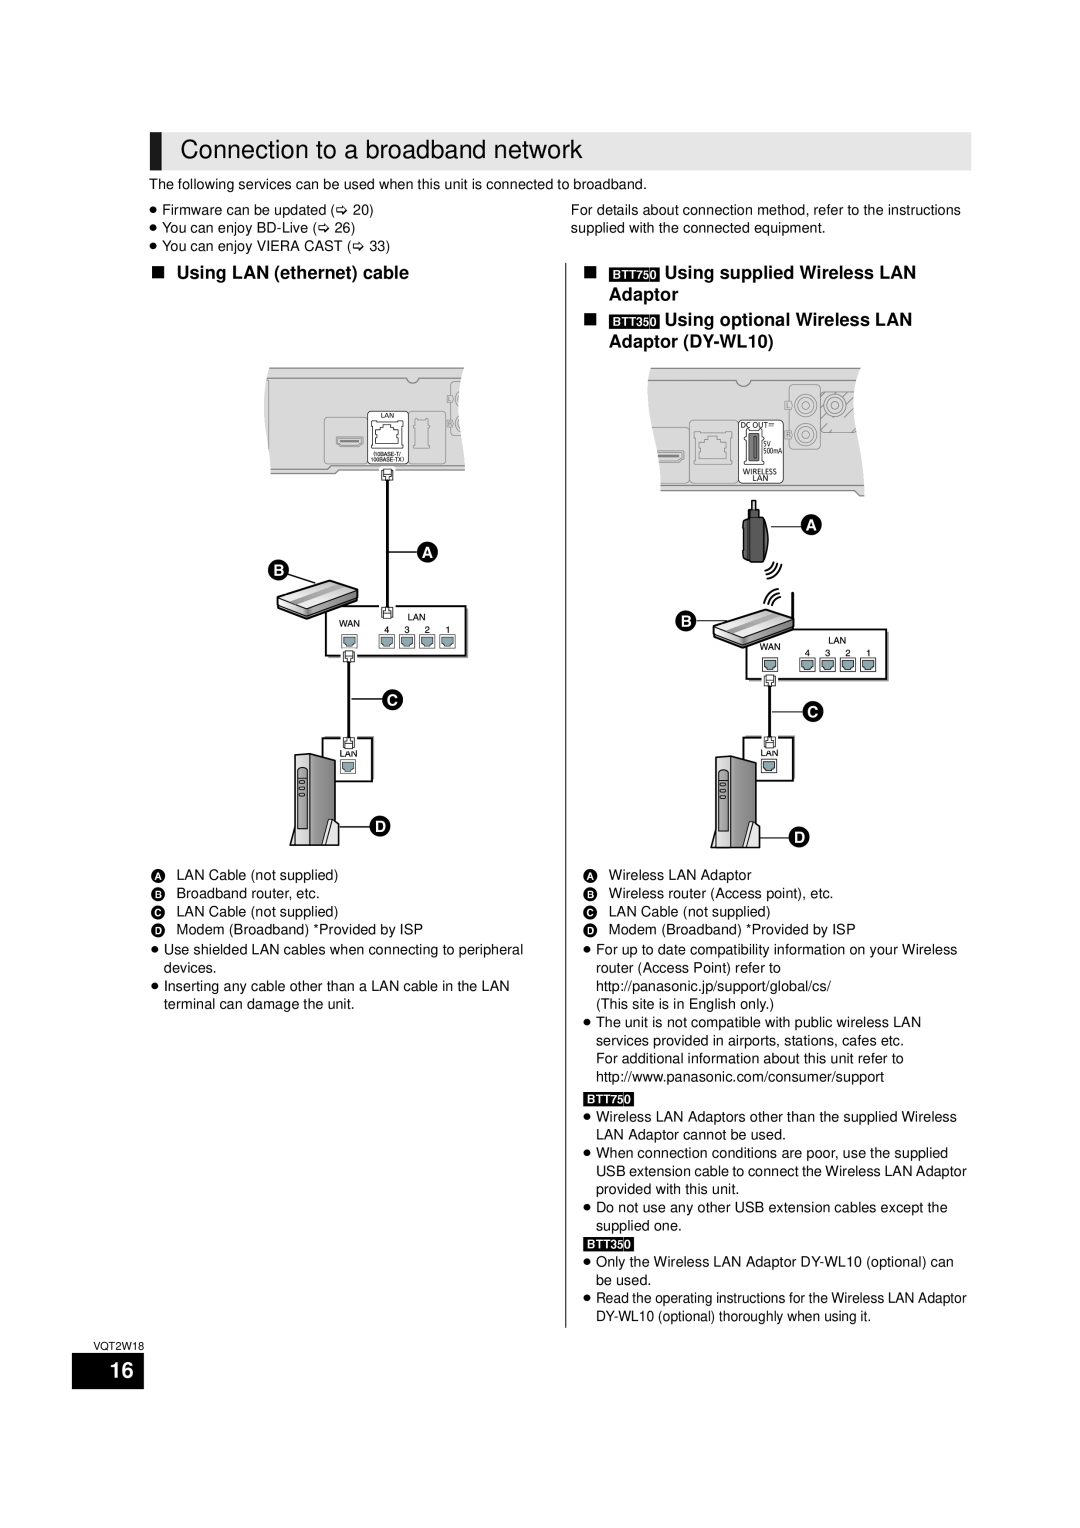 Panasonic SC-BTT750 warranty Connection to a broadband network,    , ∫ Using LAN ethernet cable, Adaptor DY-WL10 